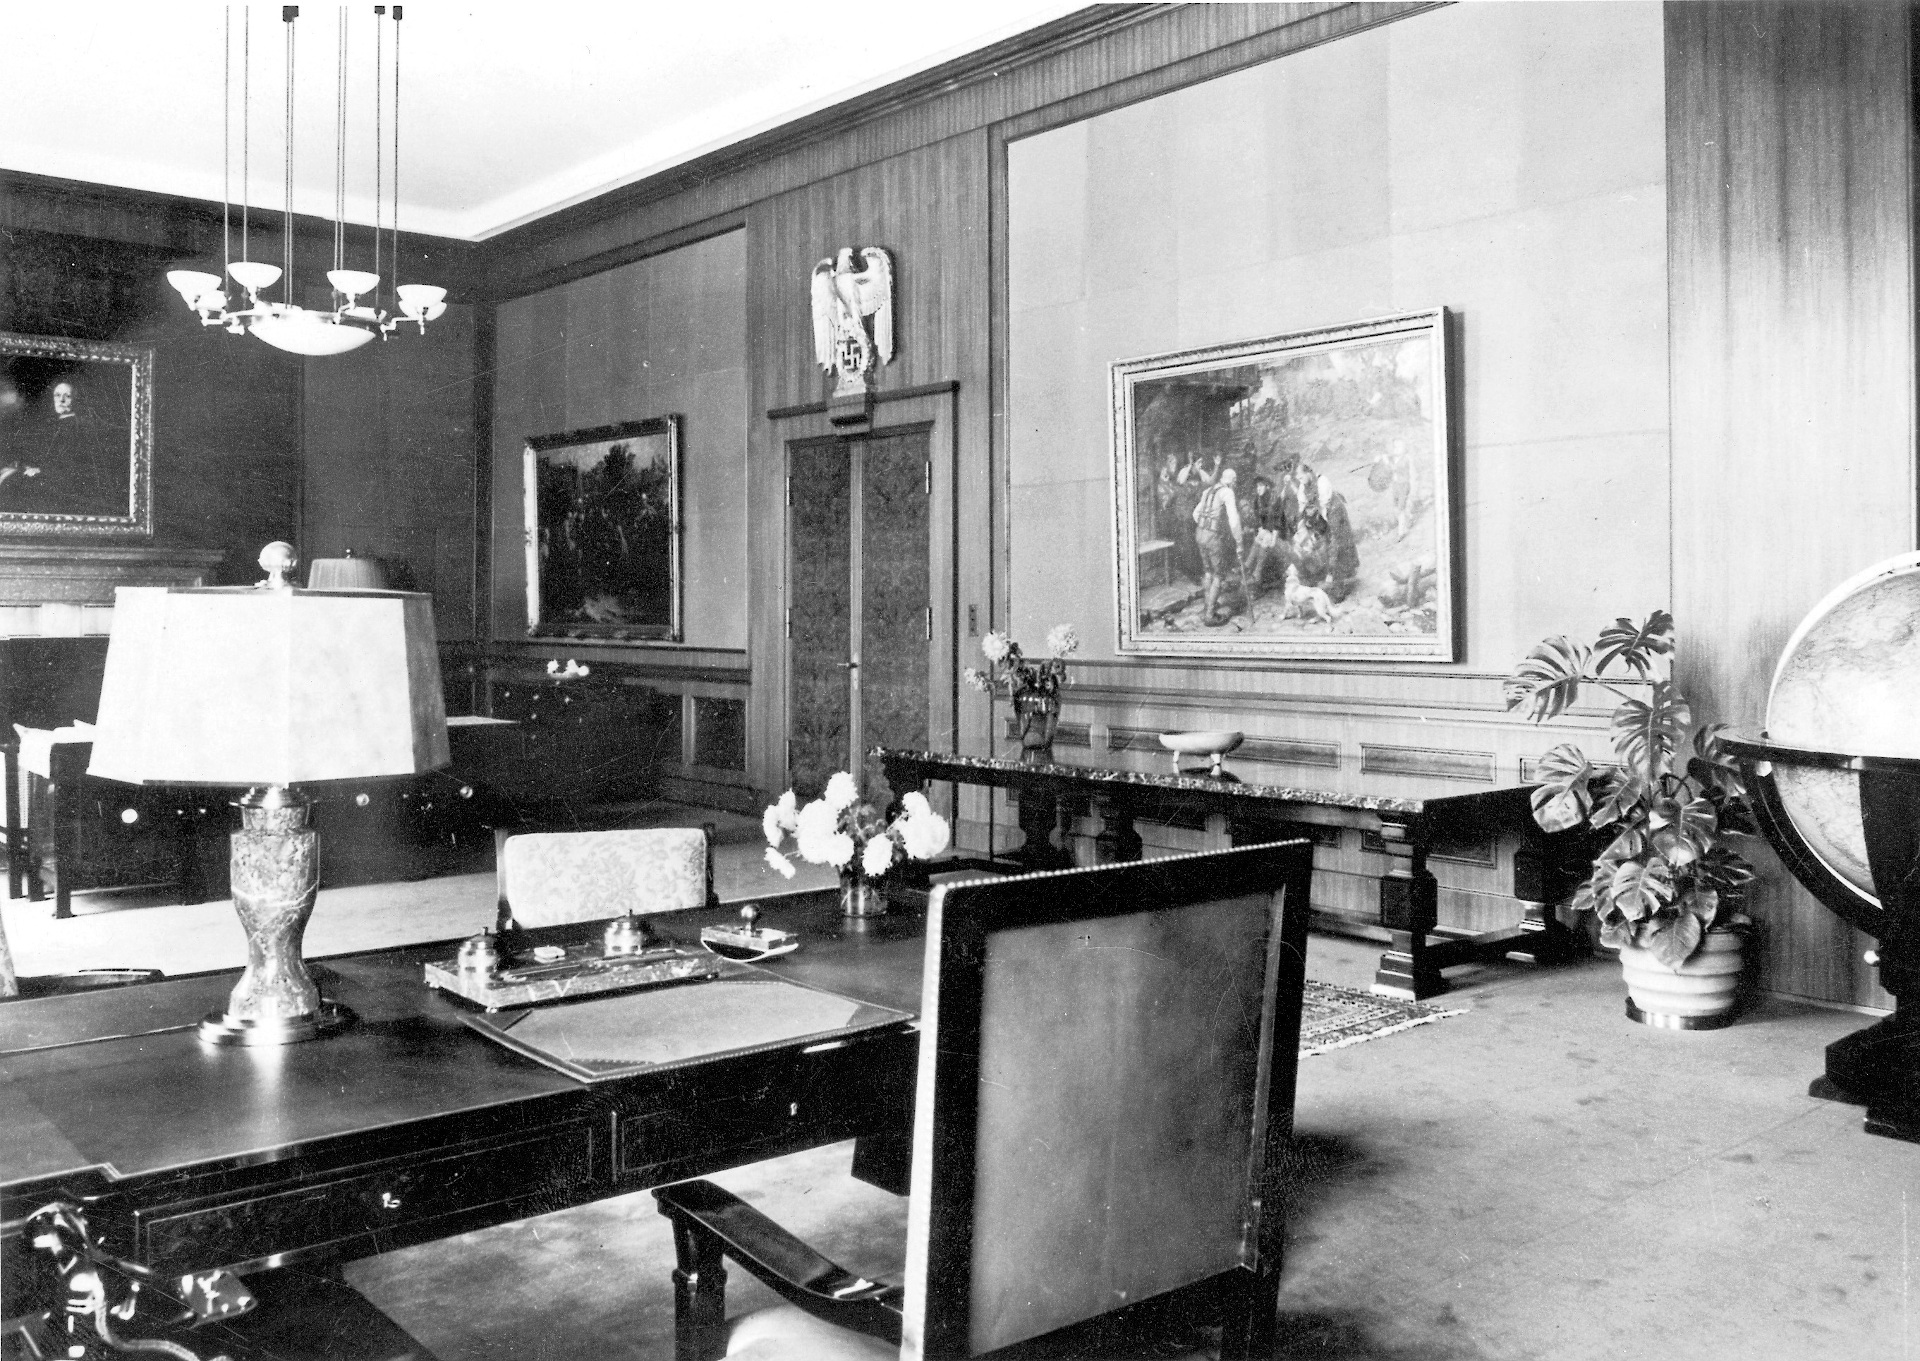 A room with a large desk, seating around a fireplace, and several paintings on the wall.